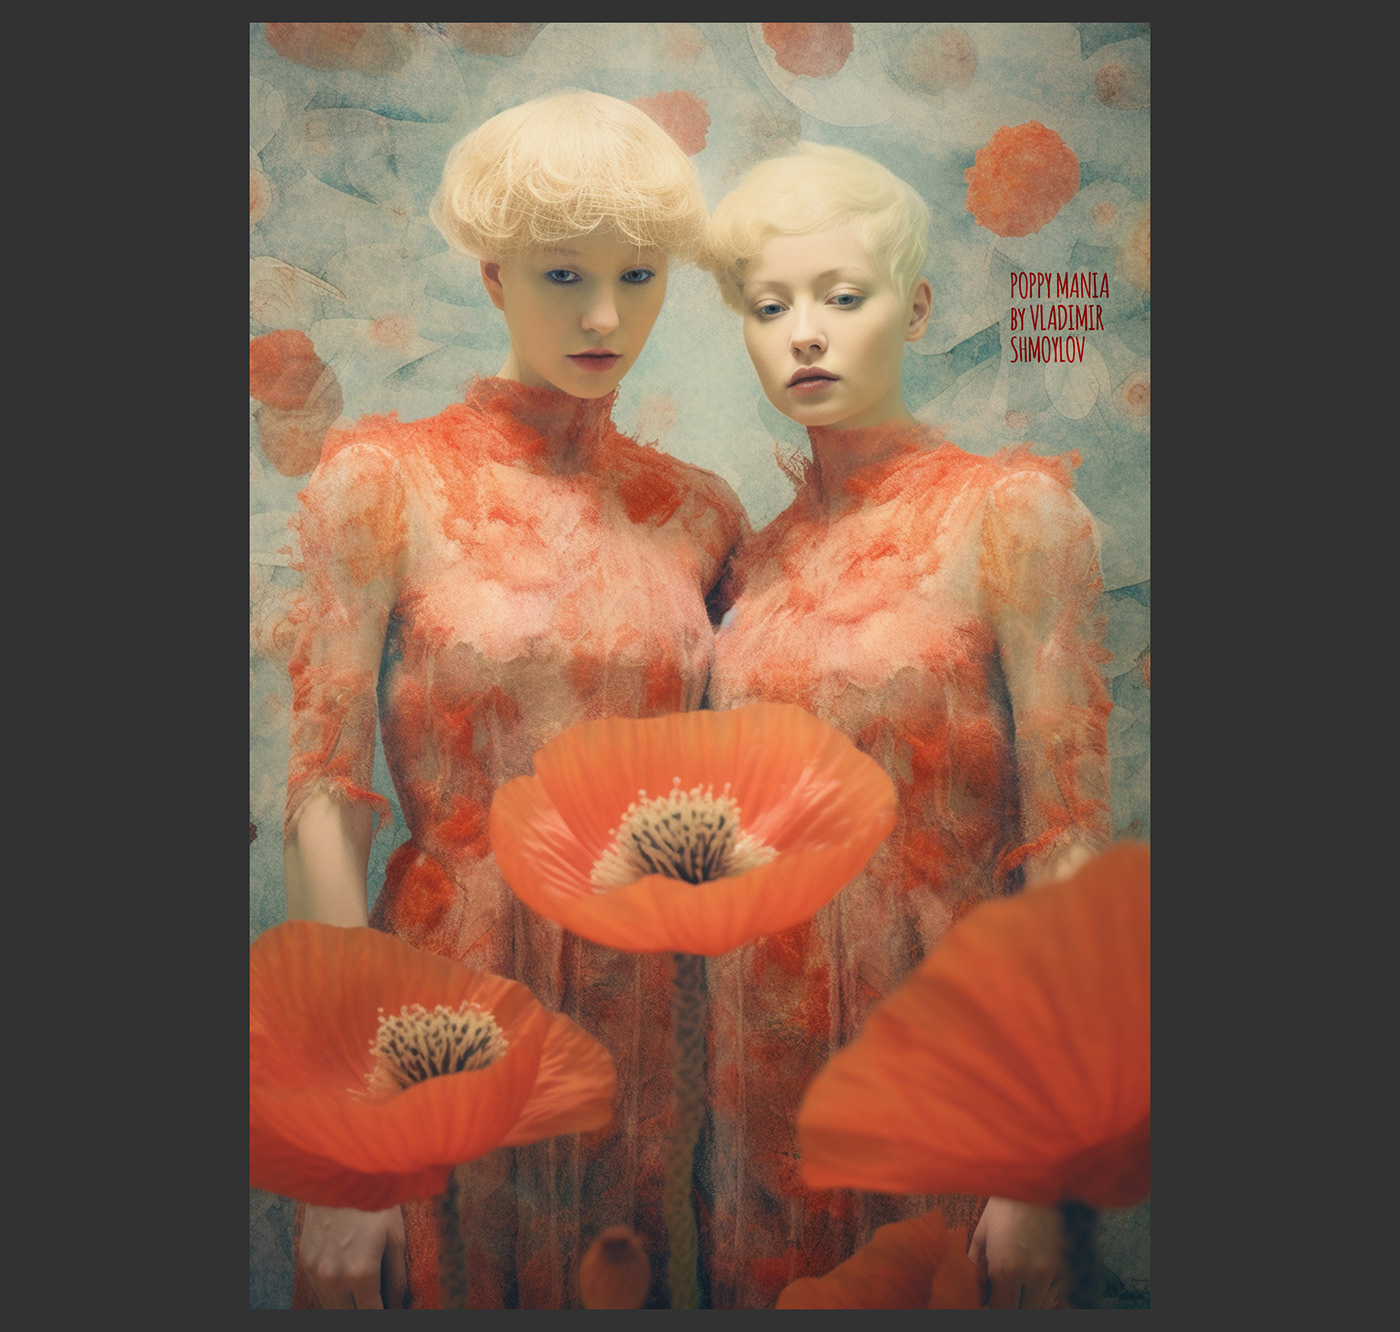 "POPPY MANIA" by Vladimir Shmoylov is a captivating project that showcases a series of portraits